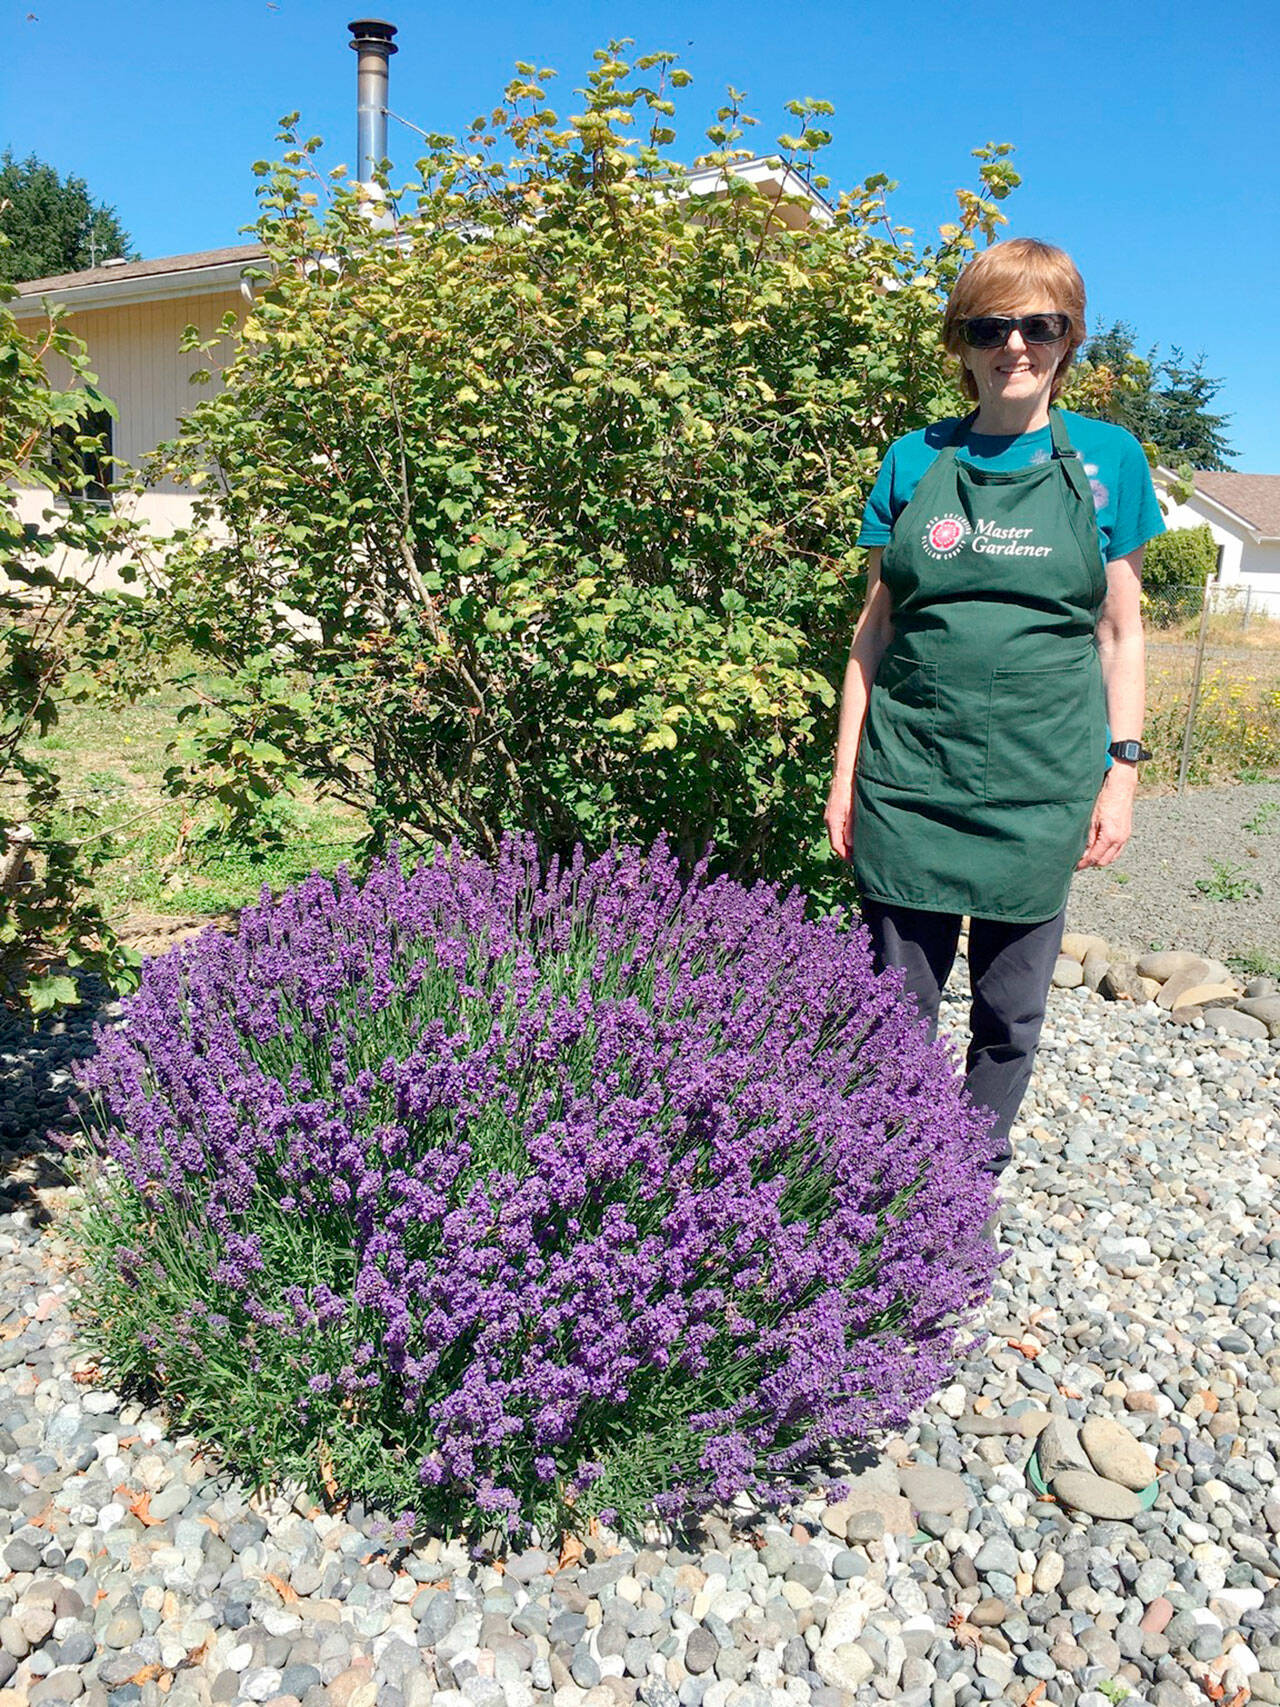 Margery Whites will present “Gardening for Newcomers” at 10:30 a.m. Saturday.